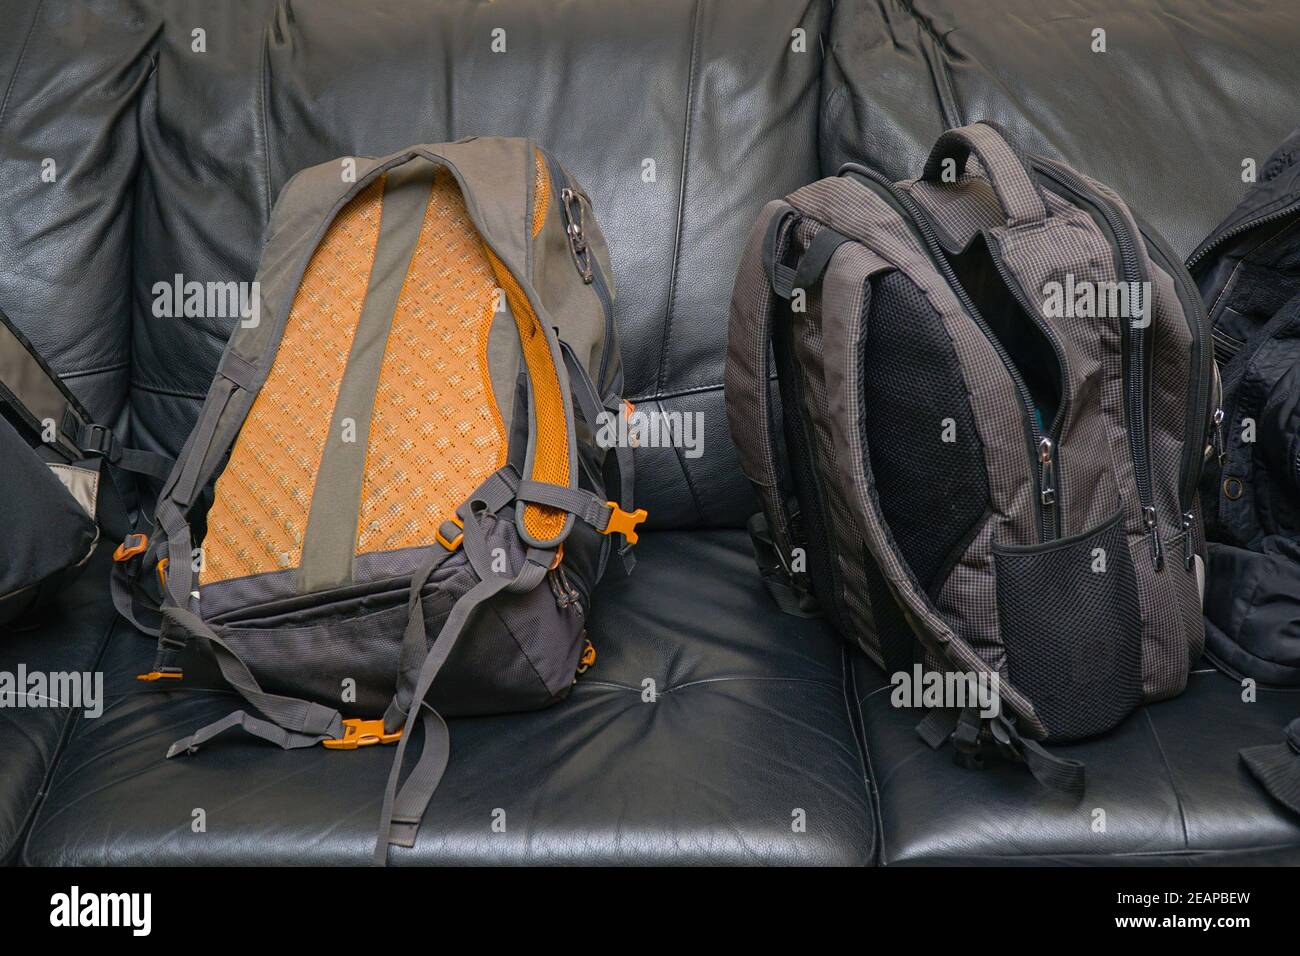 Two backpacks on a black leather sofa Stock Photo - Alamy